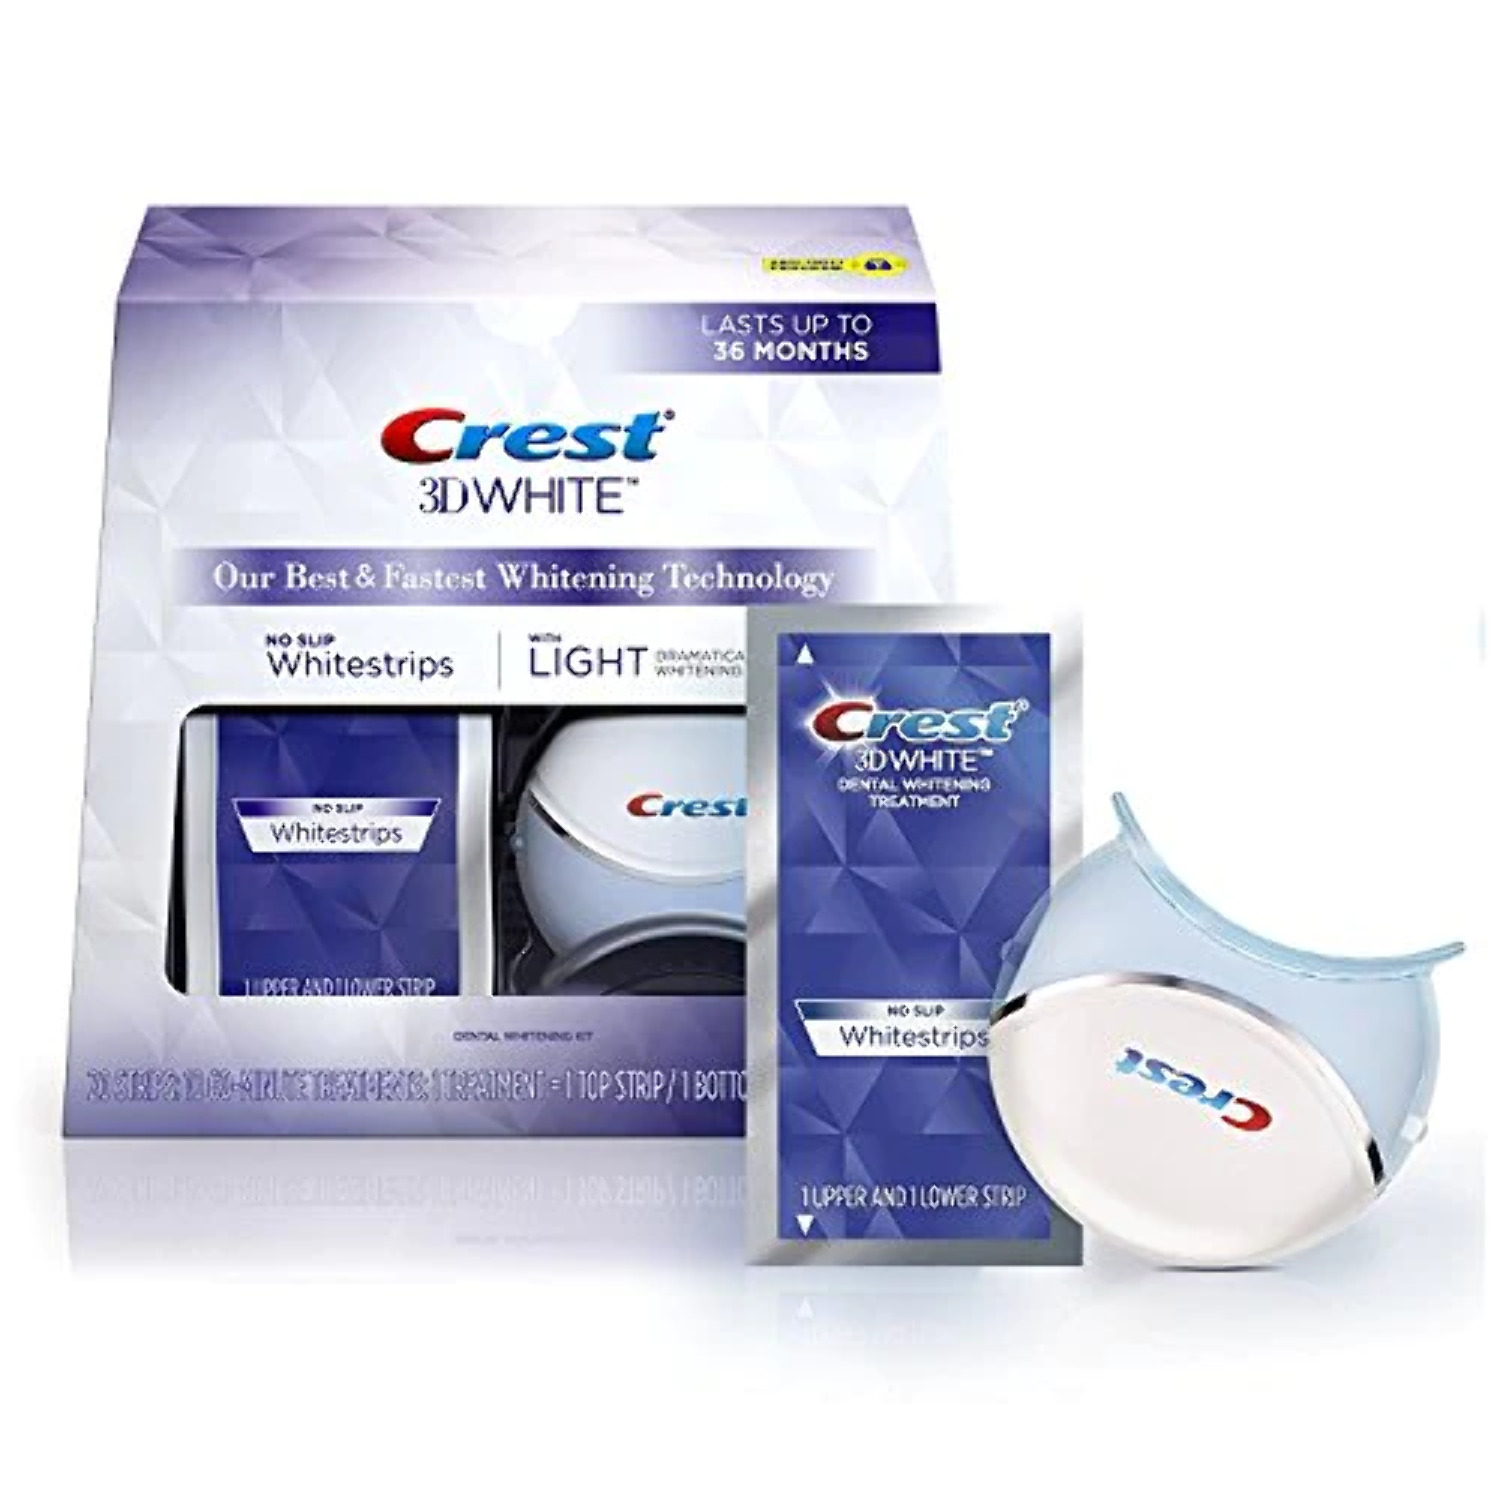 Crest 3D Whitestrips with Light Teeth Whitening Strip Kit, 10 Treatments - image 1 of 4